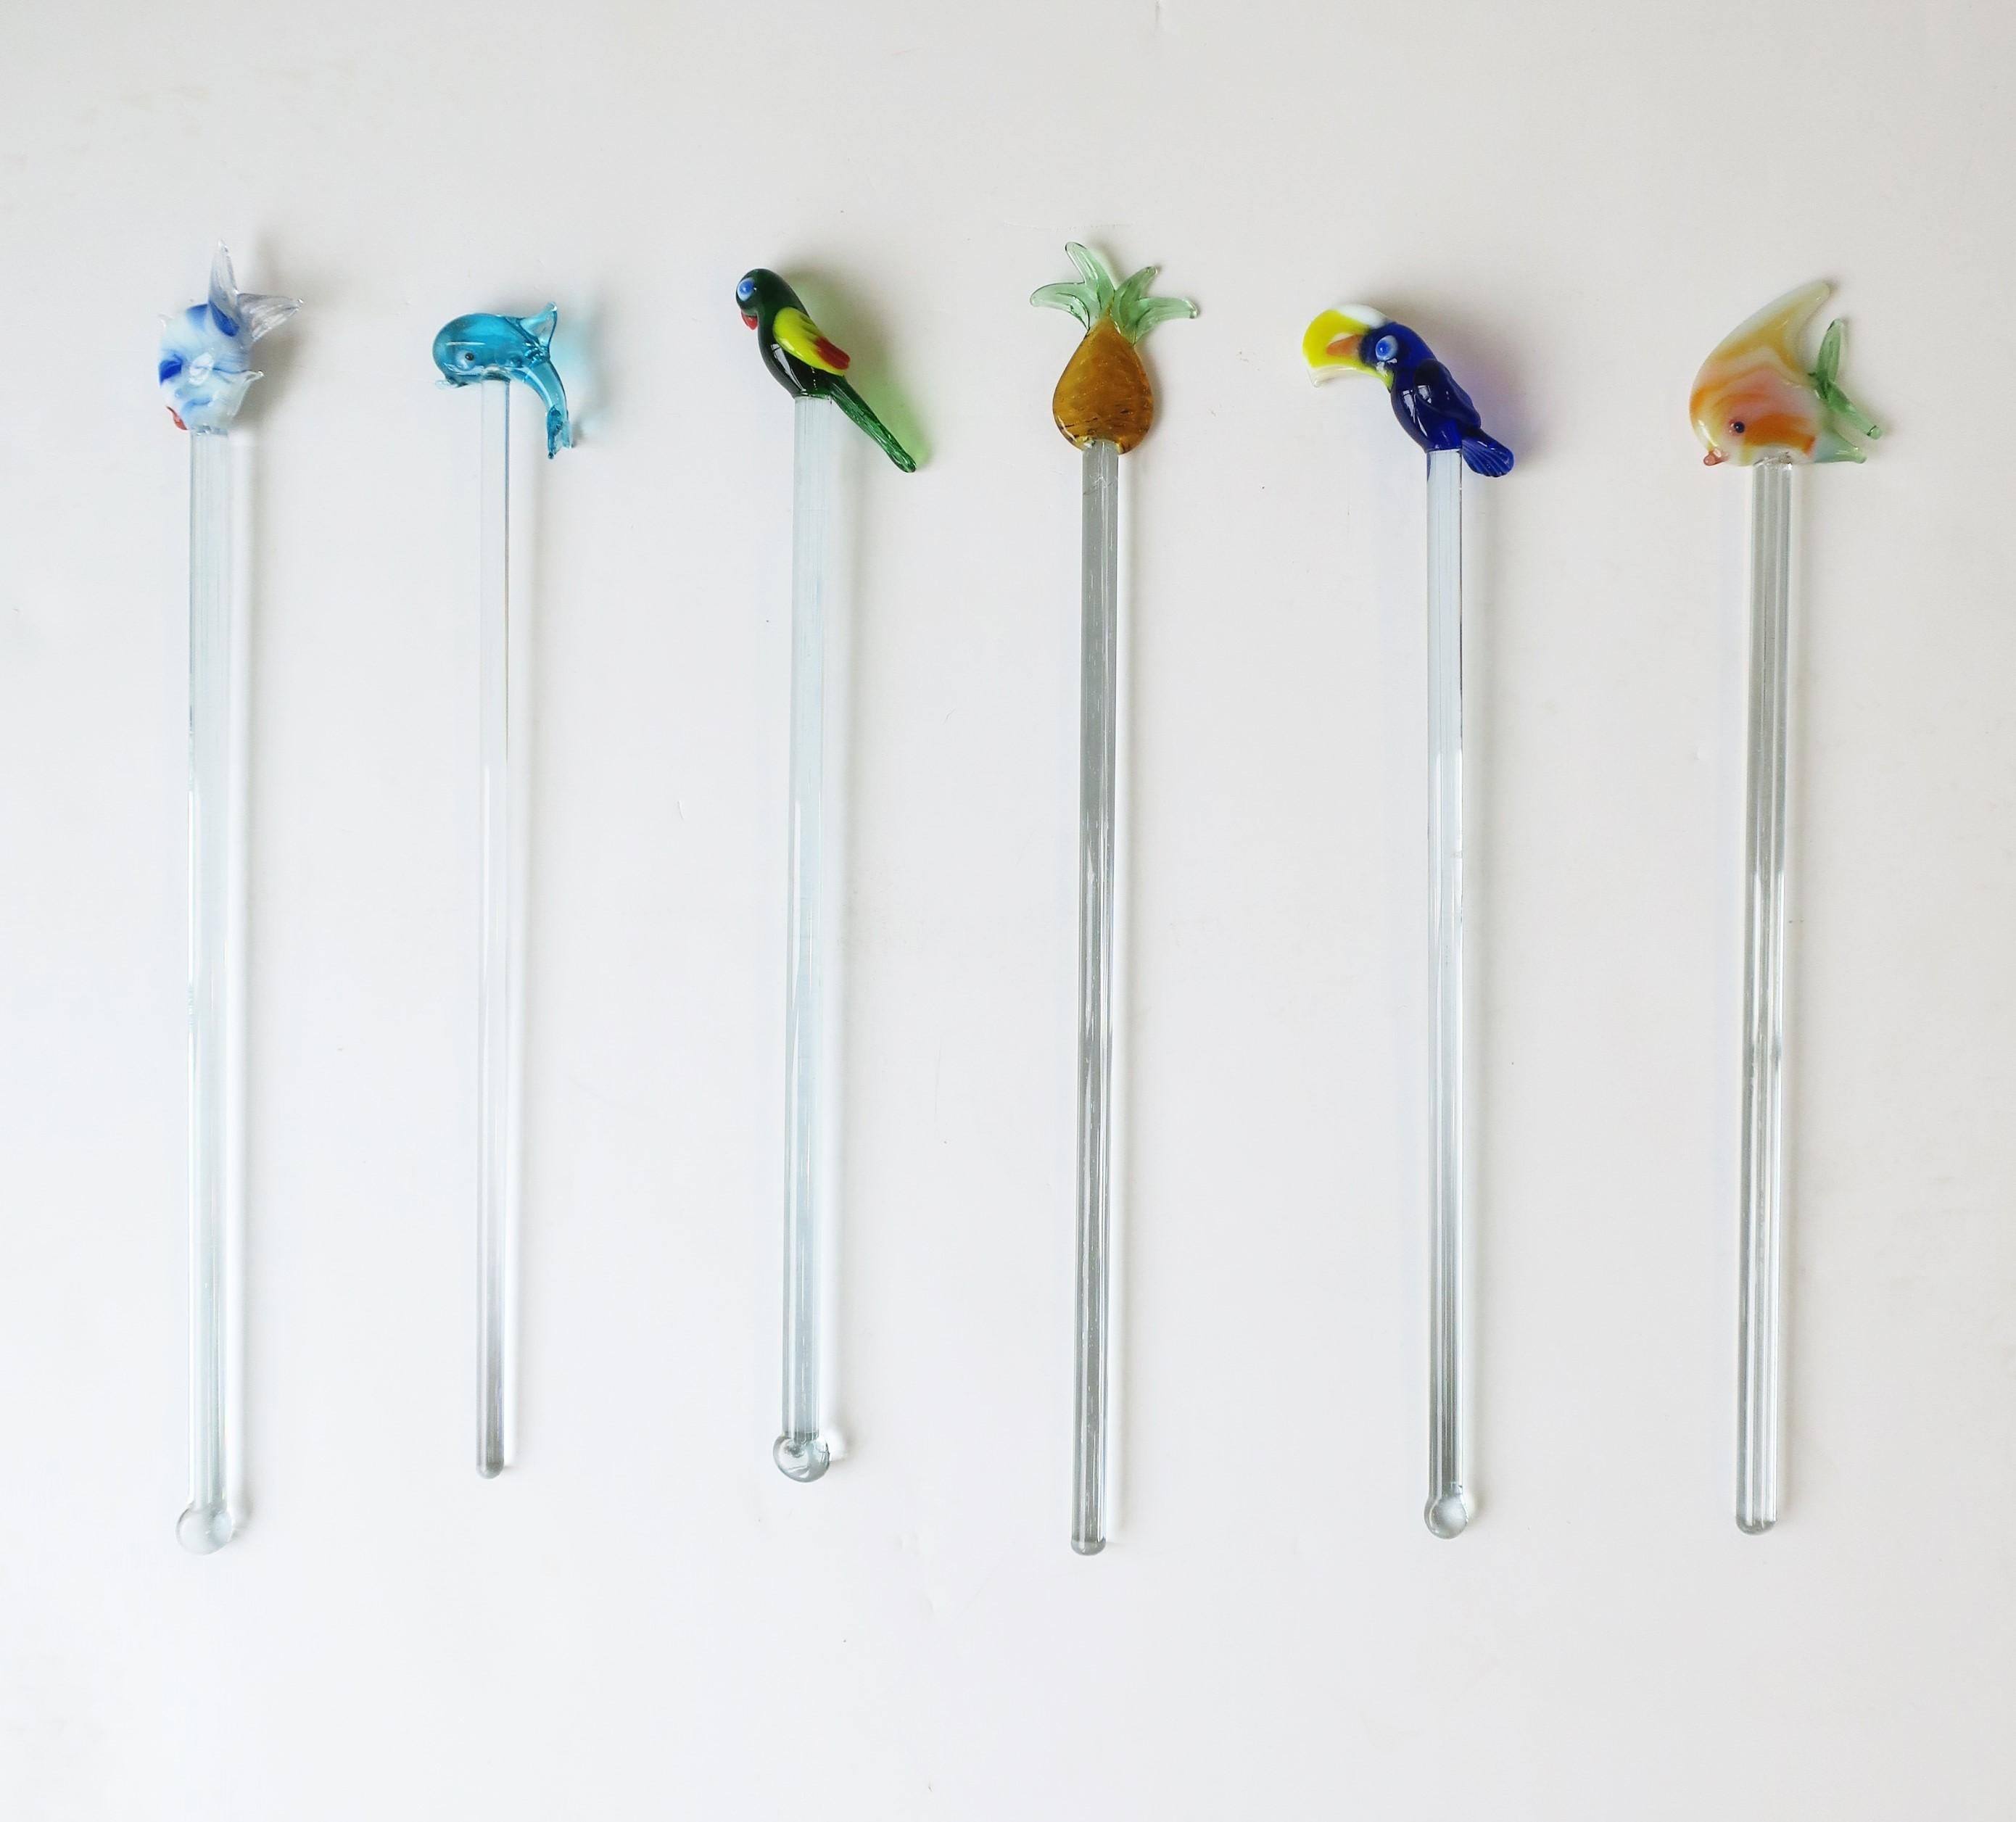 A fun set of six (6) colorful and fun vintage art glass cocktail stirrers of fish, fruit and birds, circa mid-20th century. Great for entertaining; bar, bar cart, yacht, etc. Each measure: 8.5